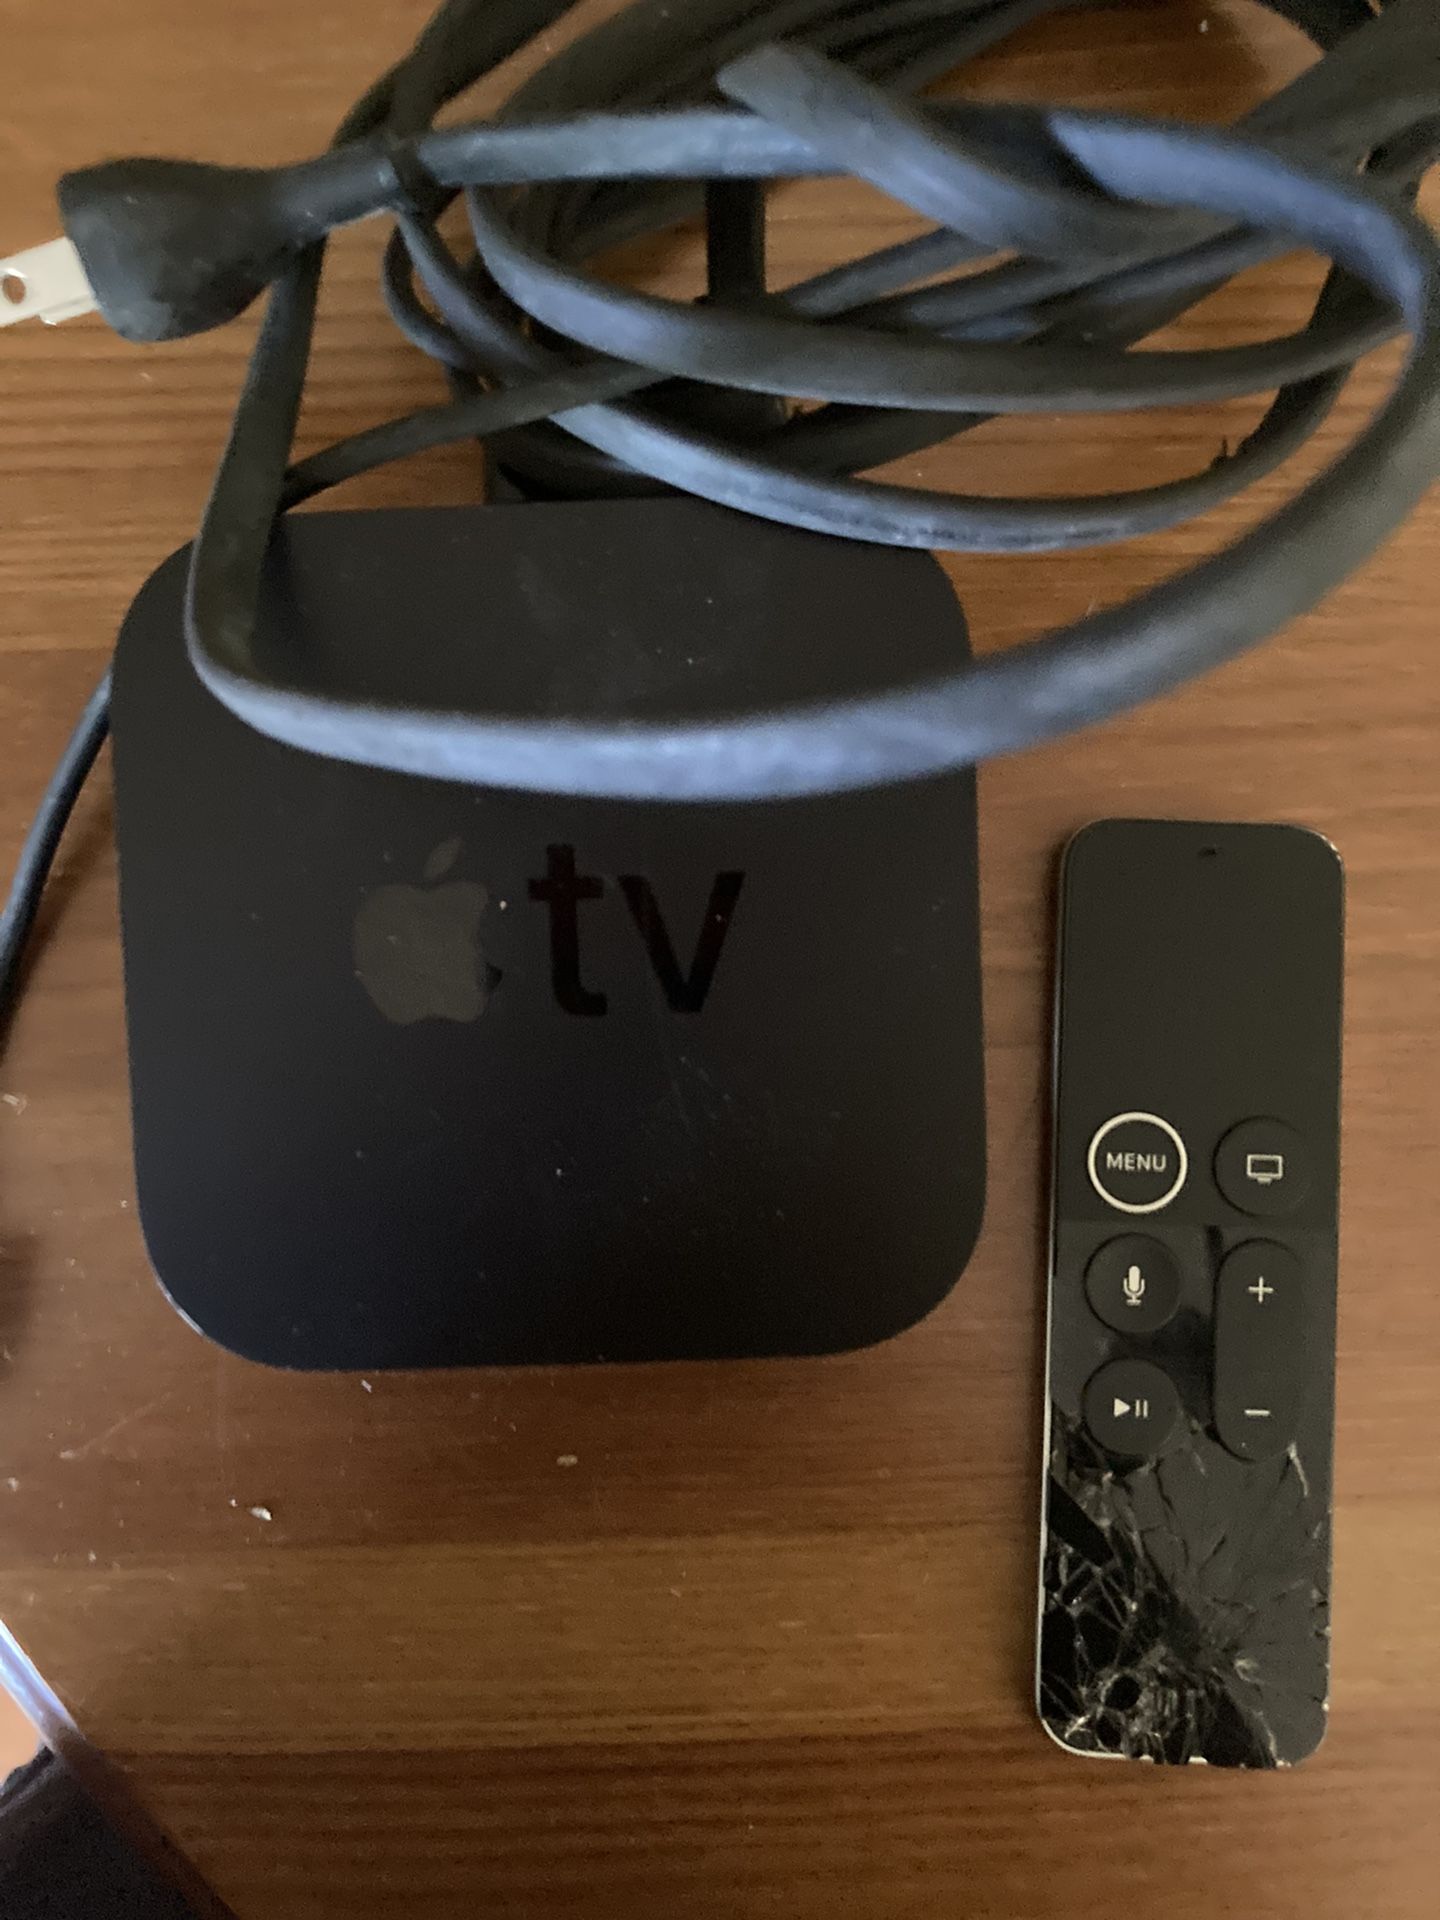 APPLE TV With Cables And Remote